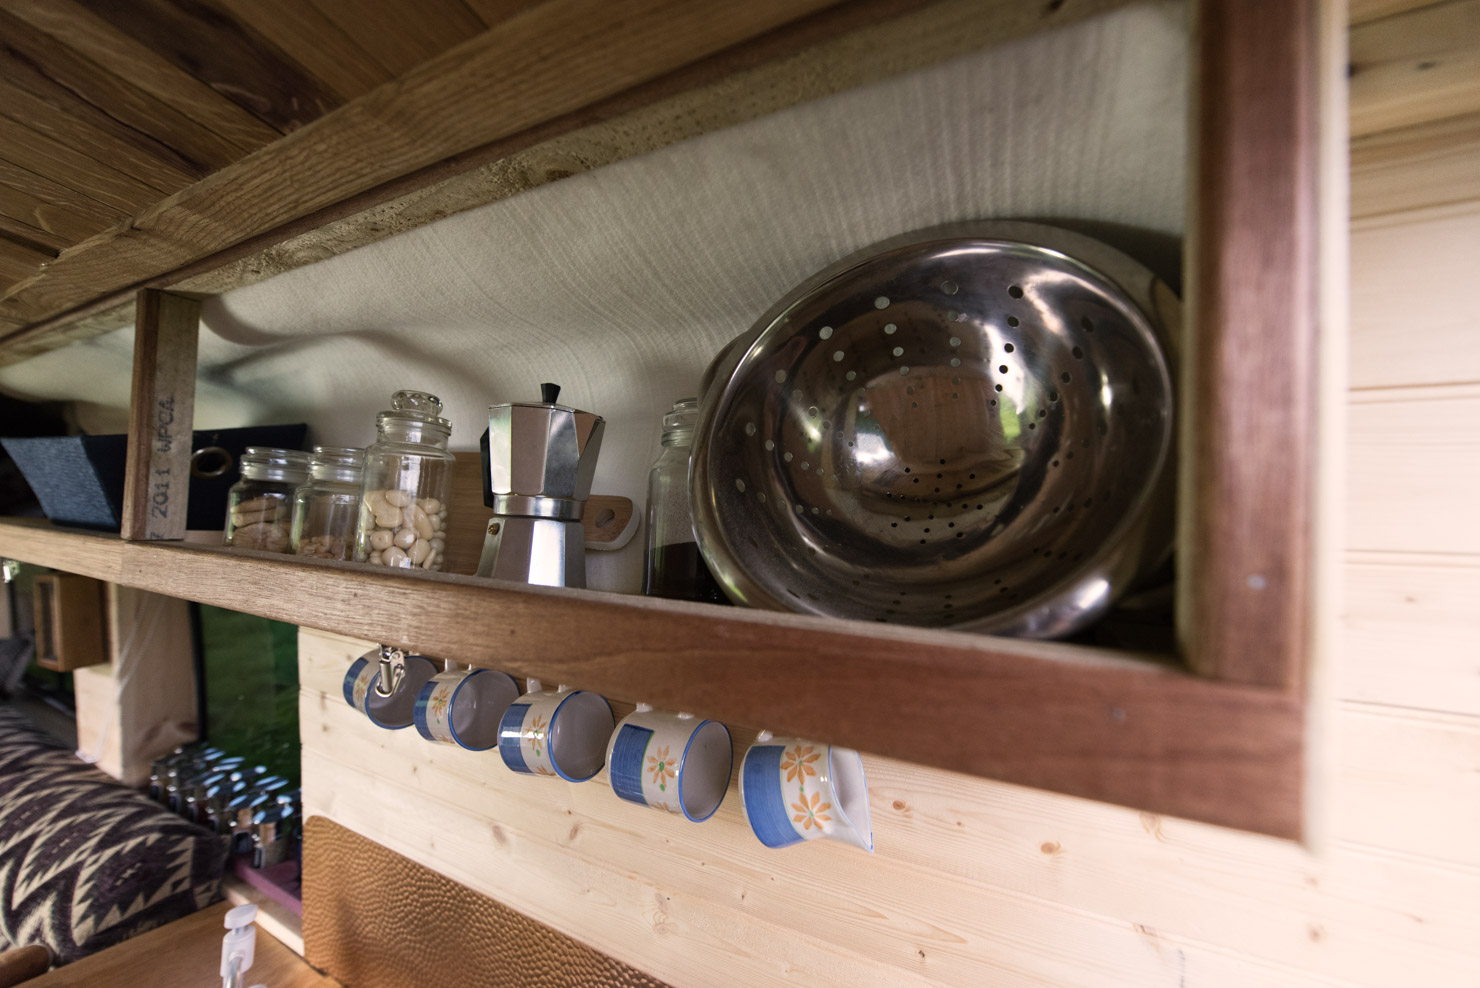 A wooden shelf inside a compact kitchen area holds several items, including a metal colander and glass jars with food. Below the shelf, mugs hang from hooks. The background features light-colored wooden paneling and a patterned cushion on the left side.